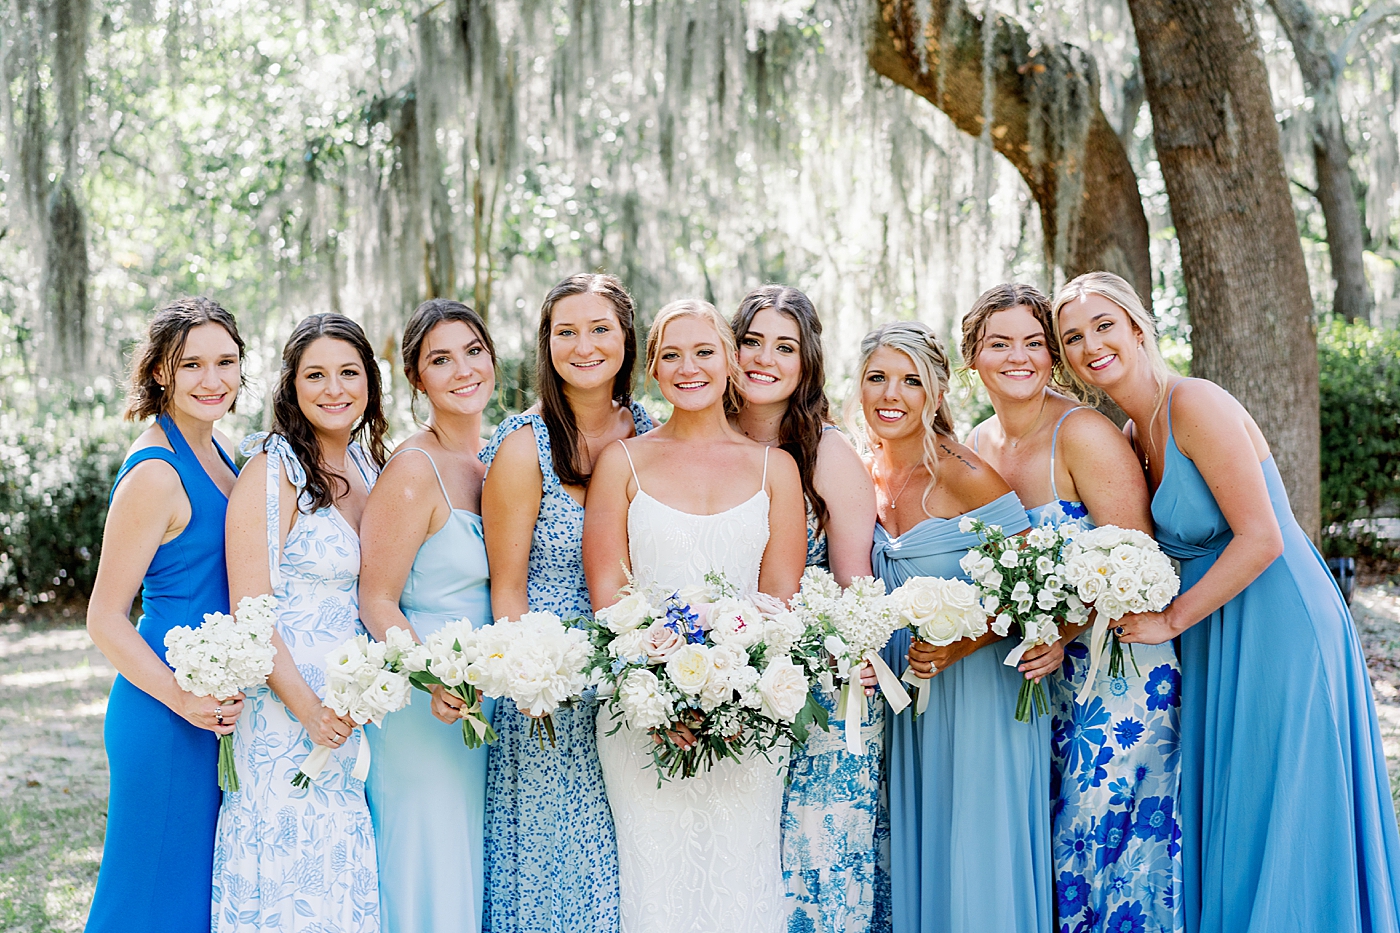 Bride with bridesmaids during Elegant Grandmillenial Charleston Wedding | Images by Annie Laura Photography